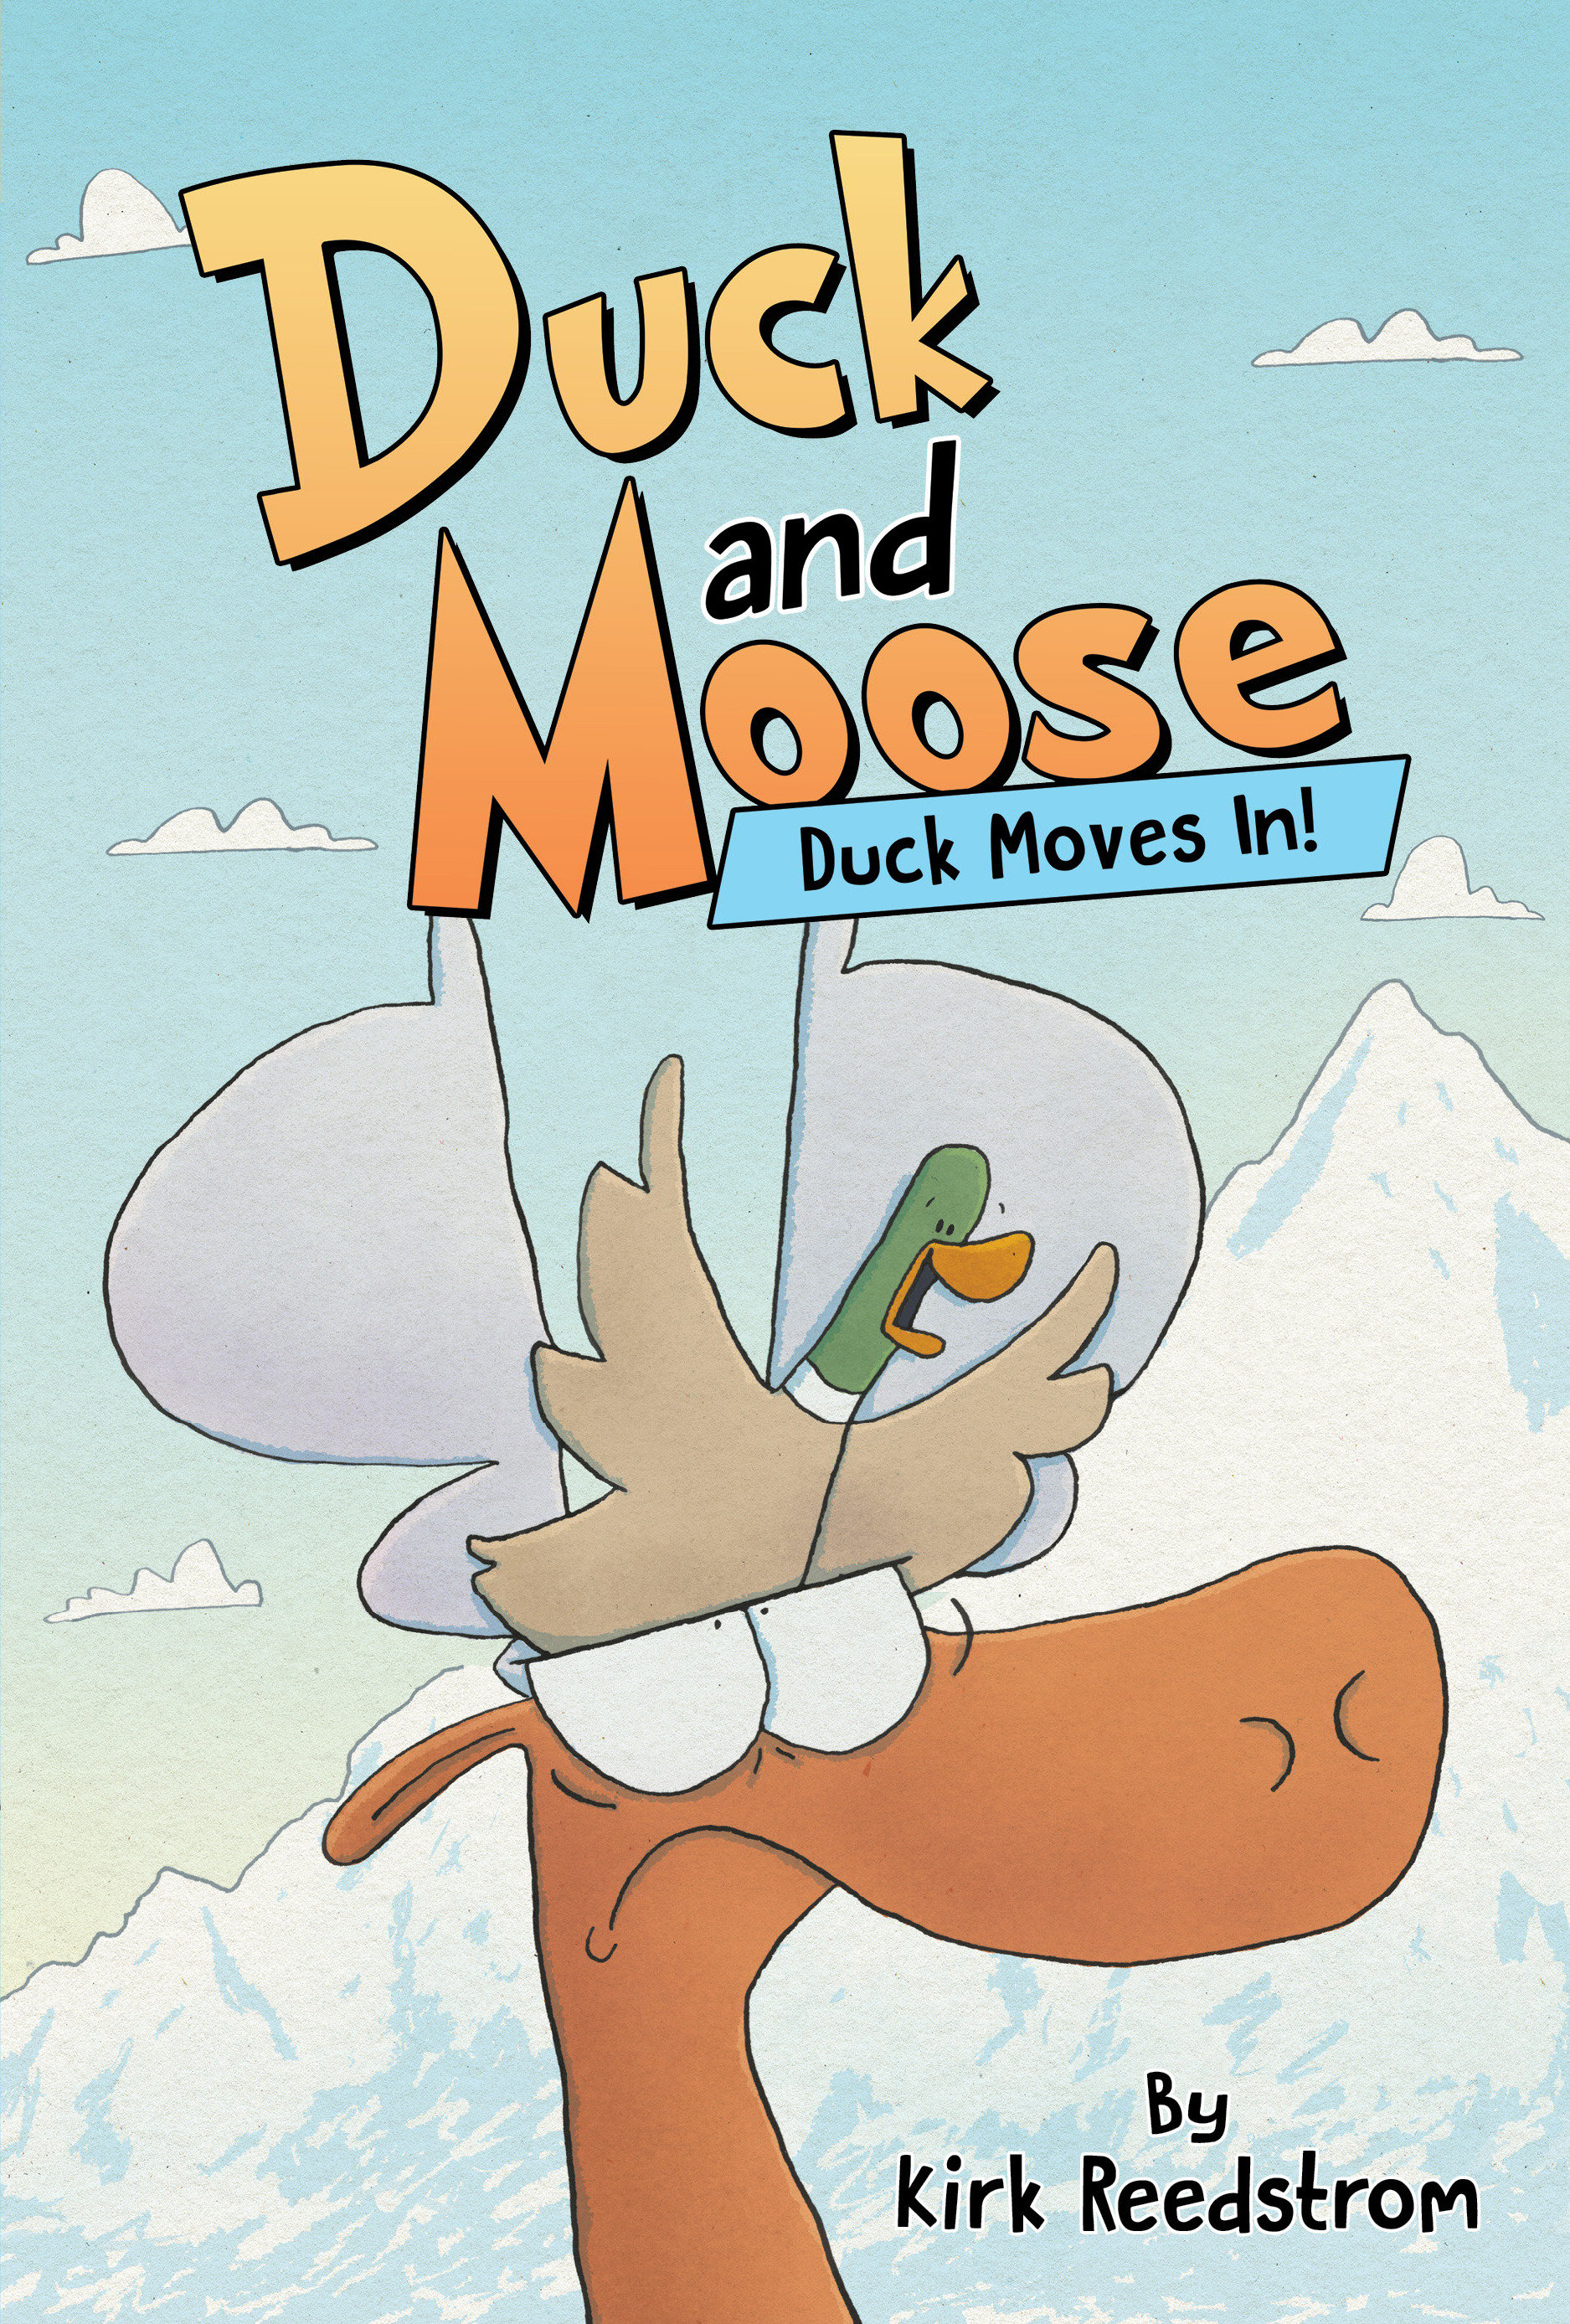 Duck and Moose Hardcover Graphic Novel Volume 1 Duck Moves In!